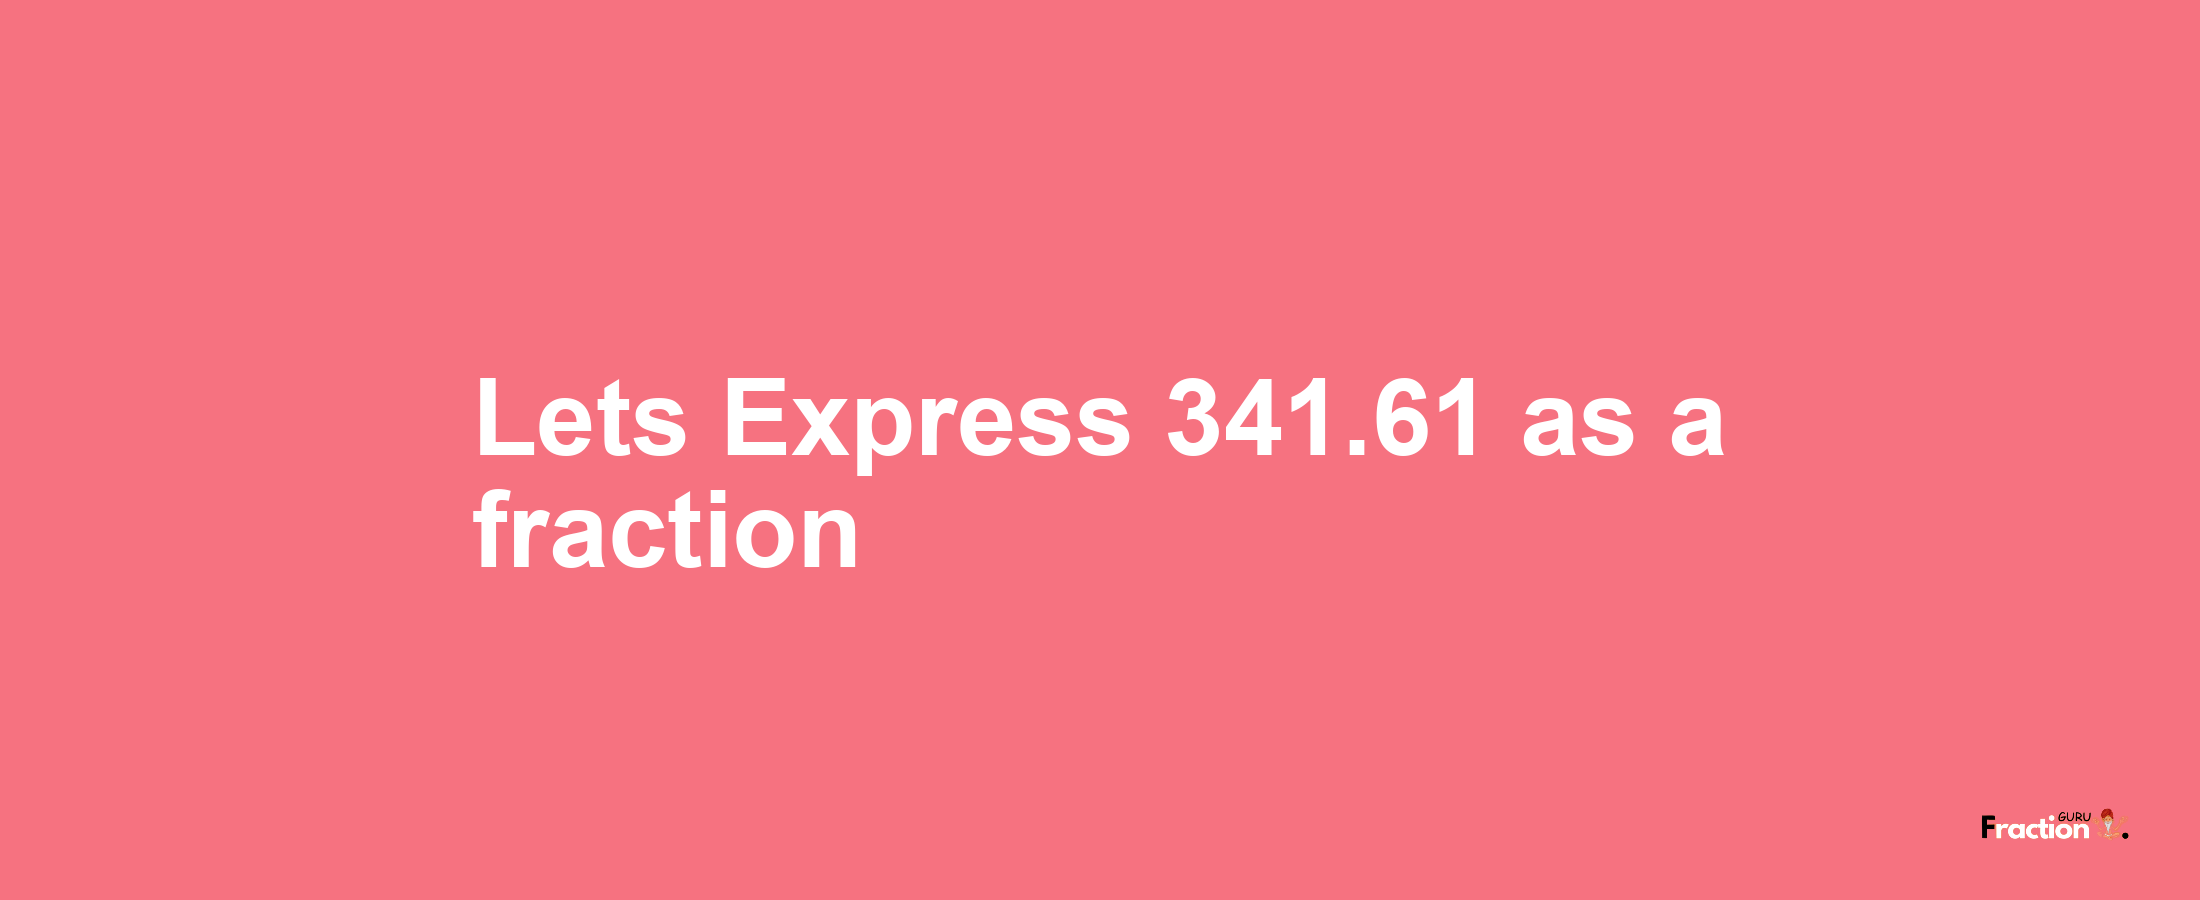 Lets Express 341.61 as afraction